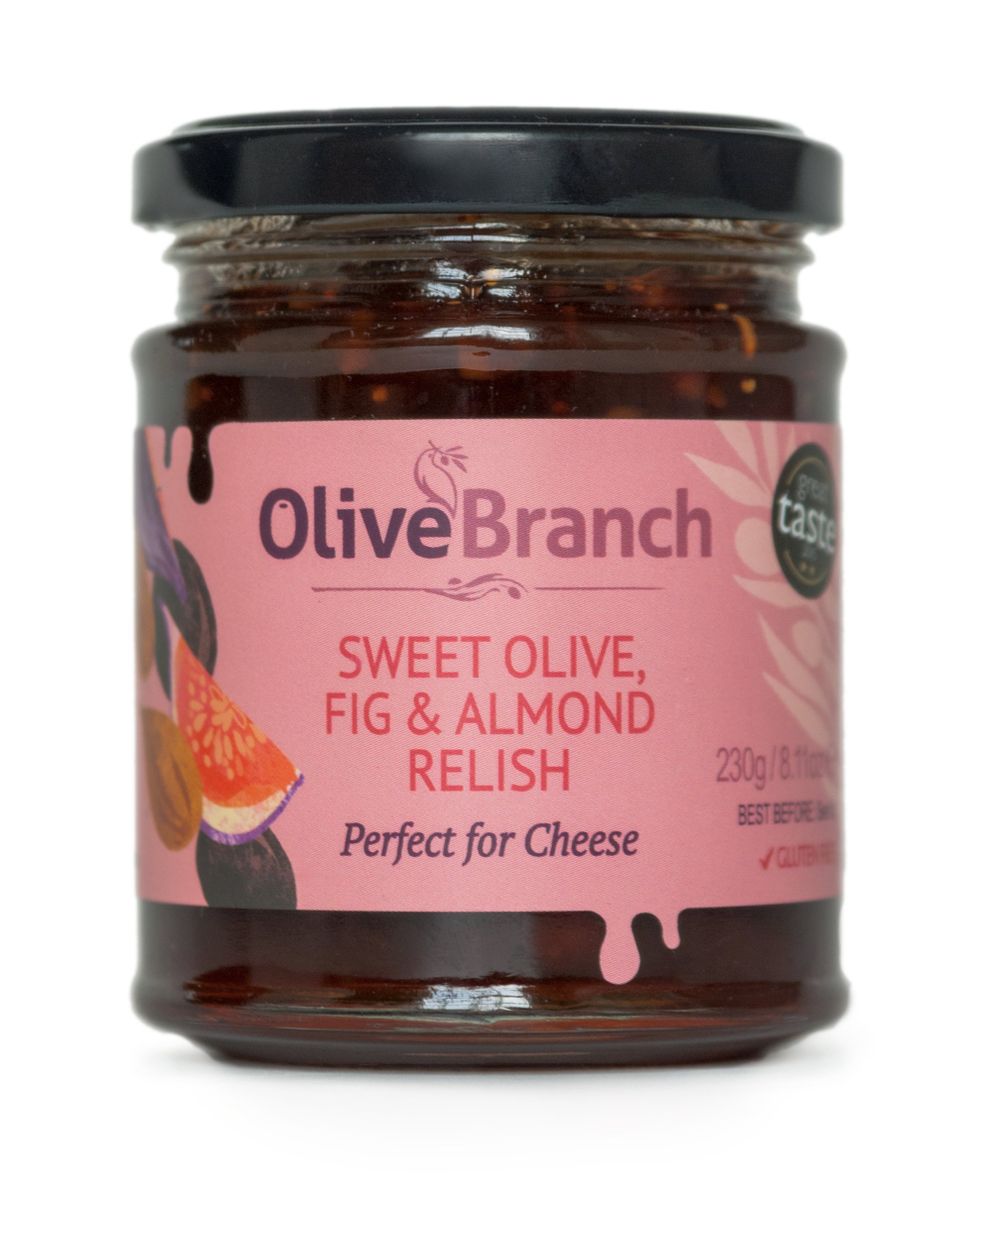 Sweet Olive, Fig & Almond Relish